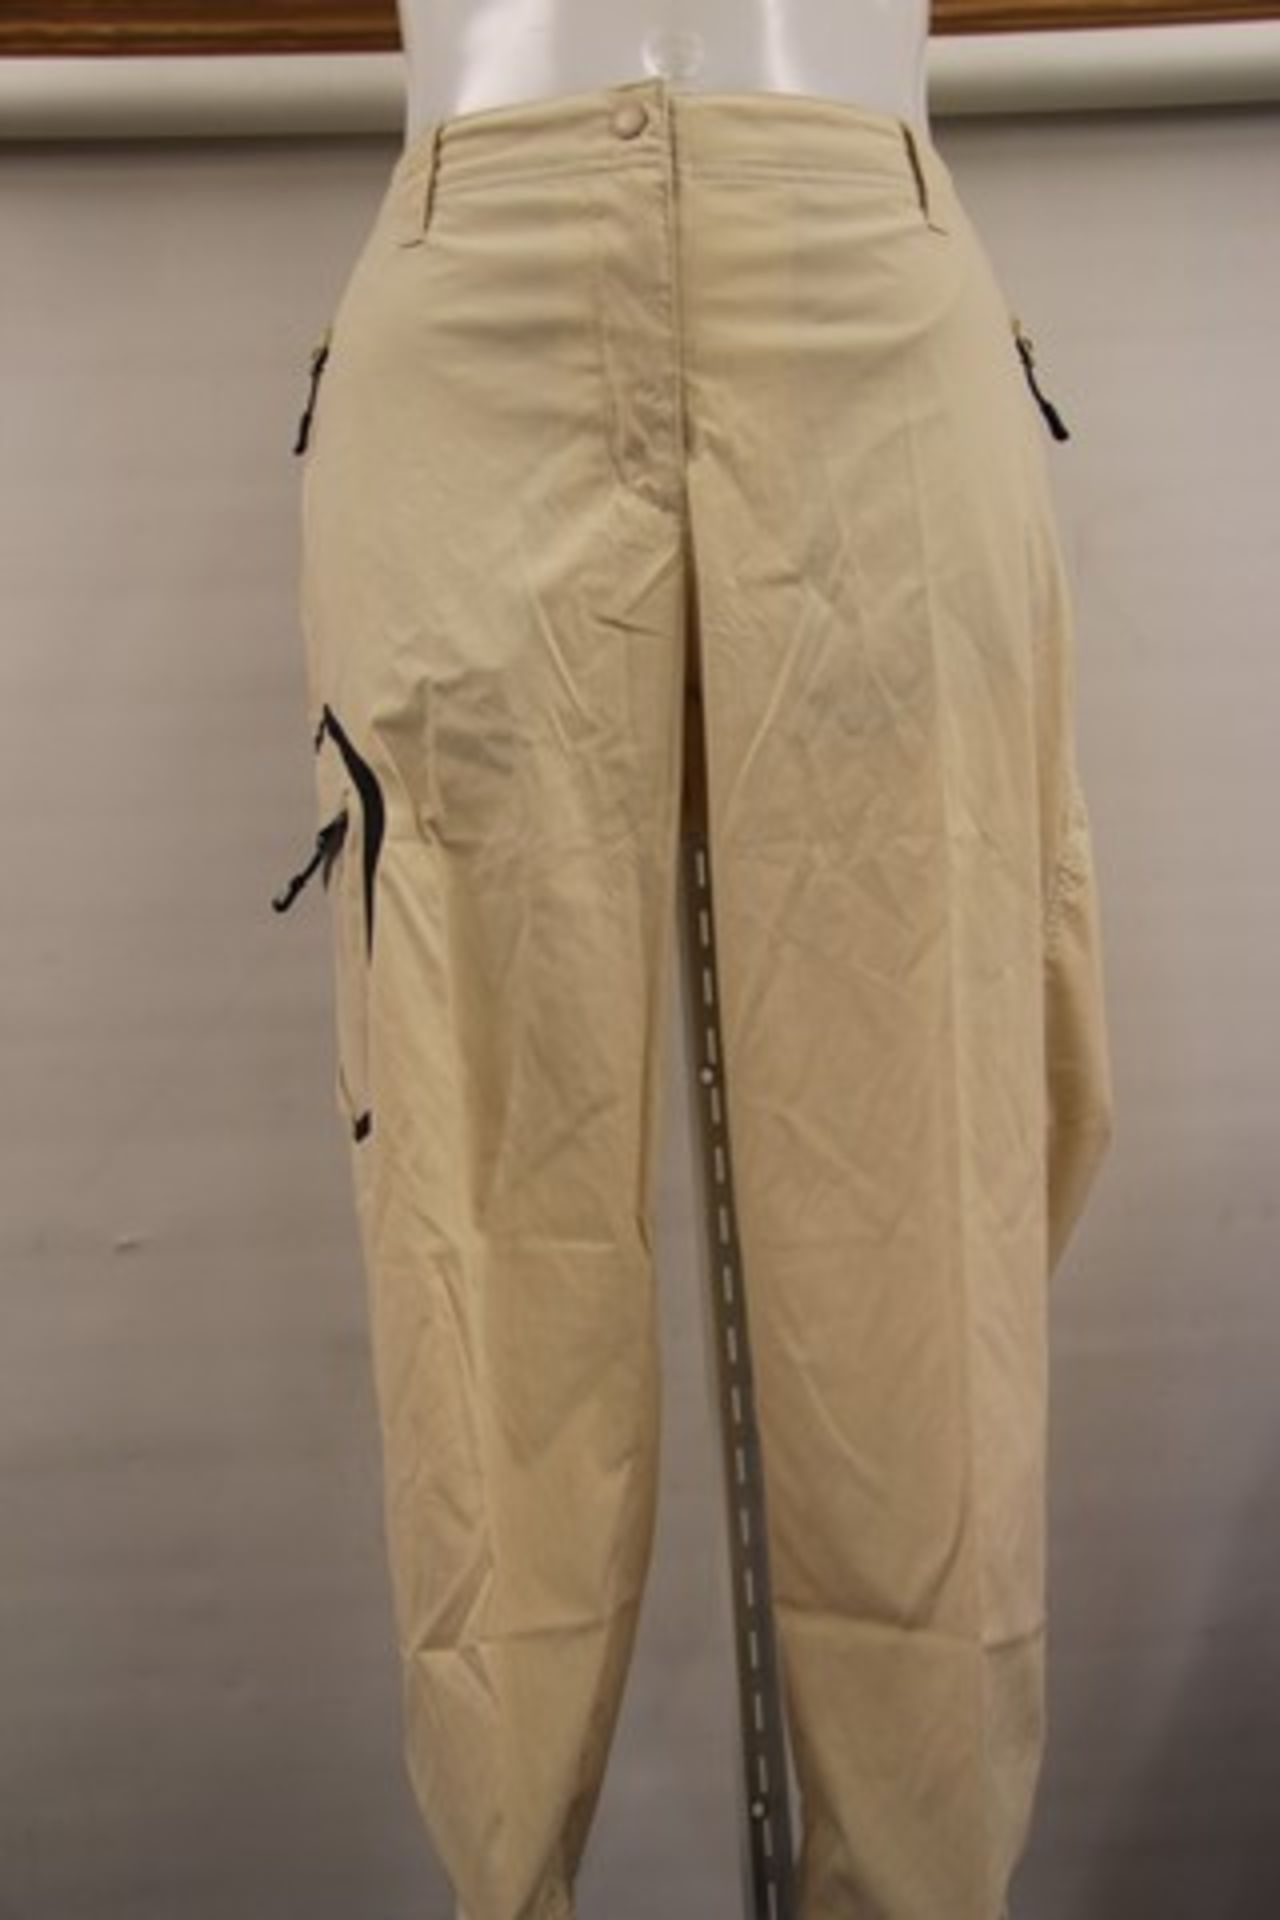 V Brand New Pair Lands End Pale Tan Three Quarter Length Trousers Size M RRP £50